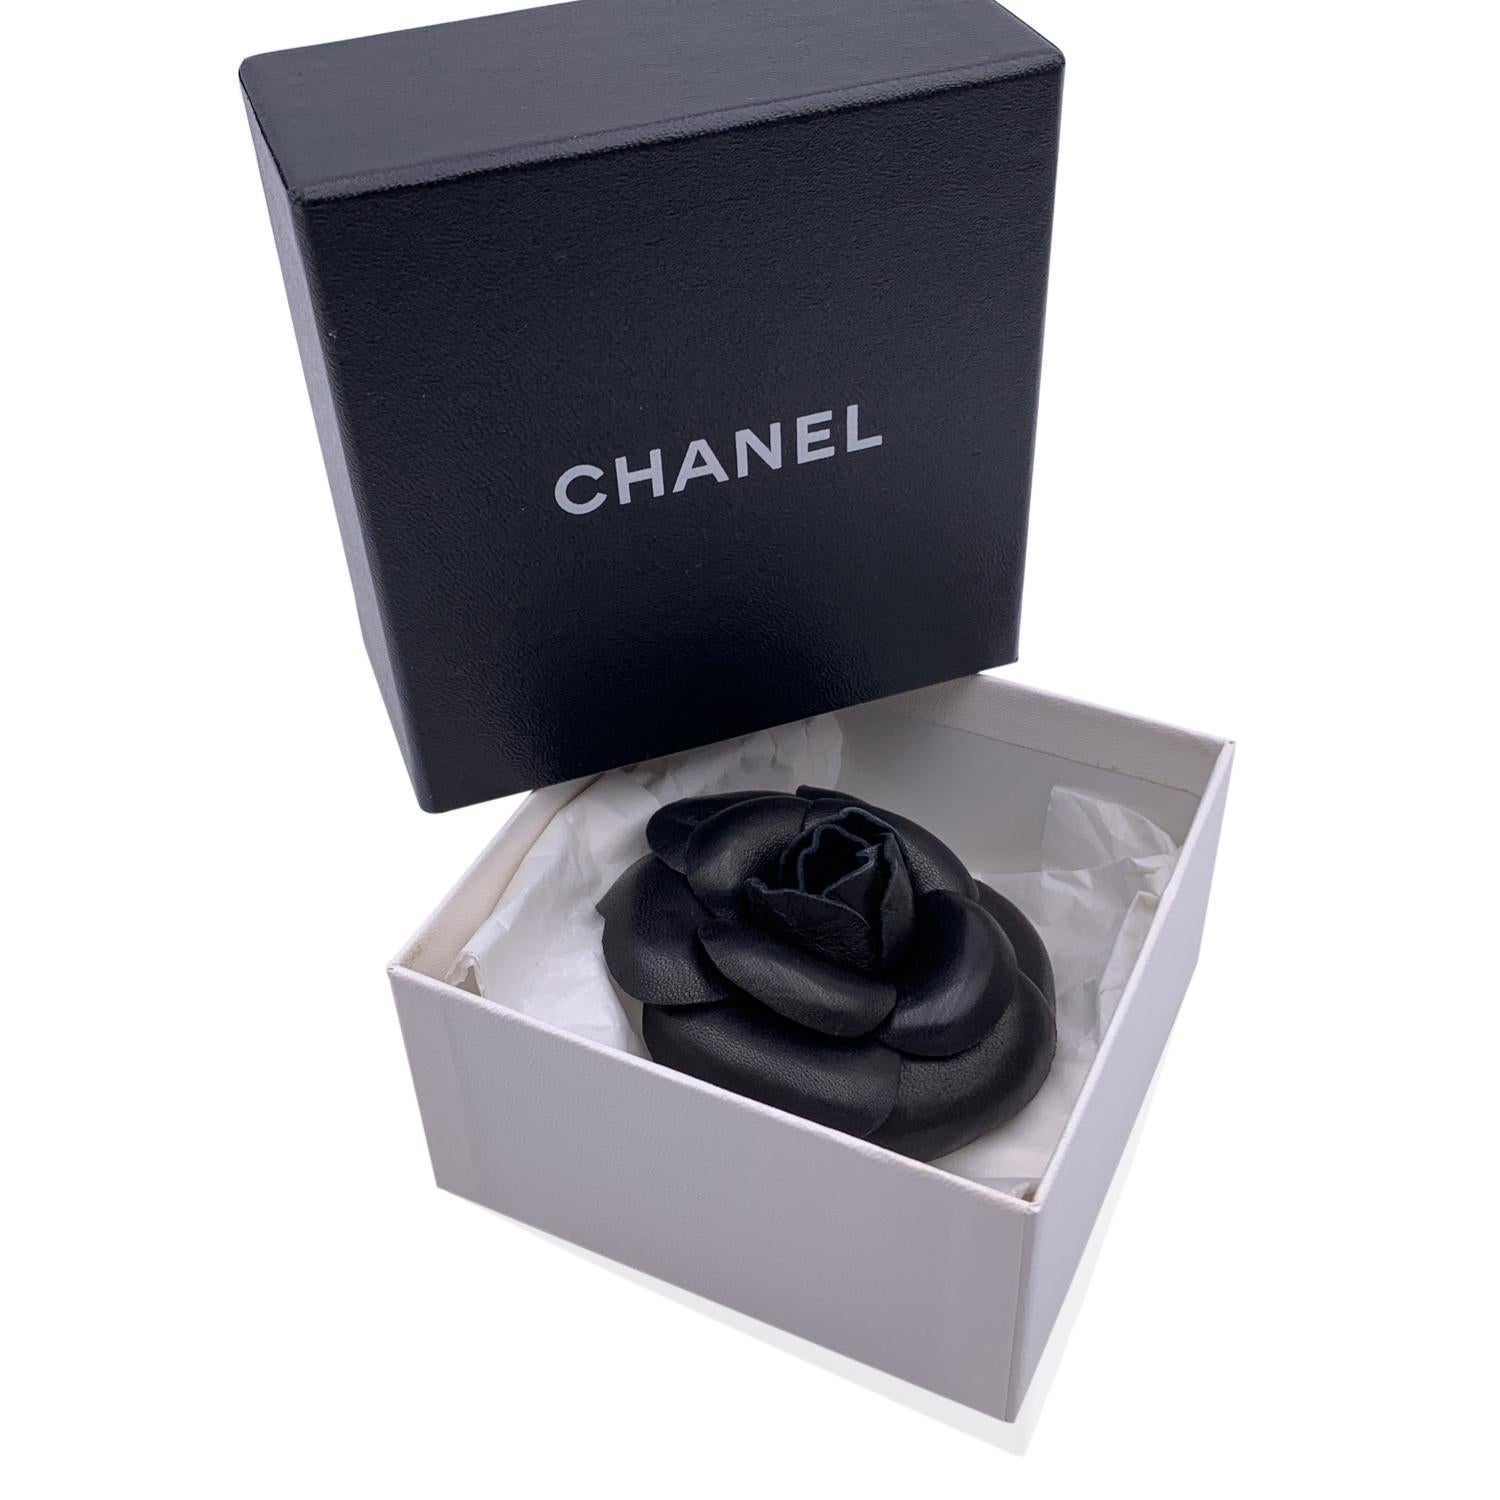 Chanel Vintage Camelia Camellia Flower Pin Brooch. Black leather petals. Safety pin closure. Diameter: 3.5 inches - 8.9 cm. 'CHANEL - CC - Made in France' oval tab on the back

Condition

A - EXCELLENT

Gently used. Chanel box included. Please check